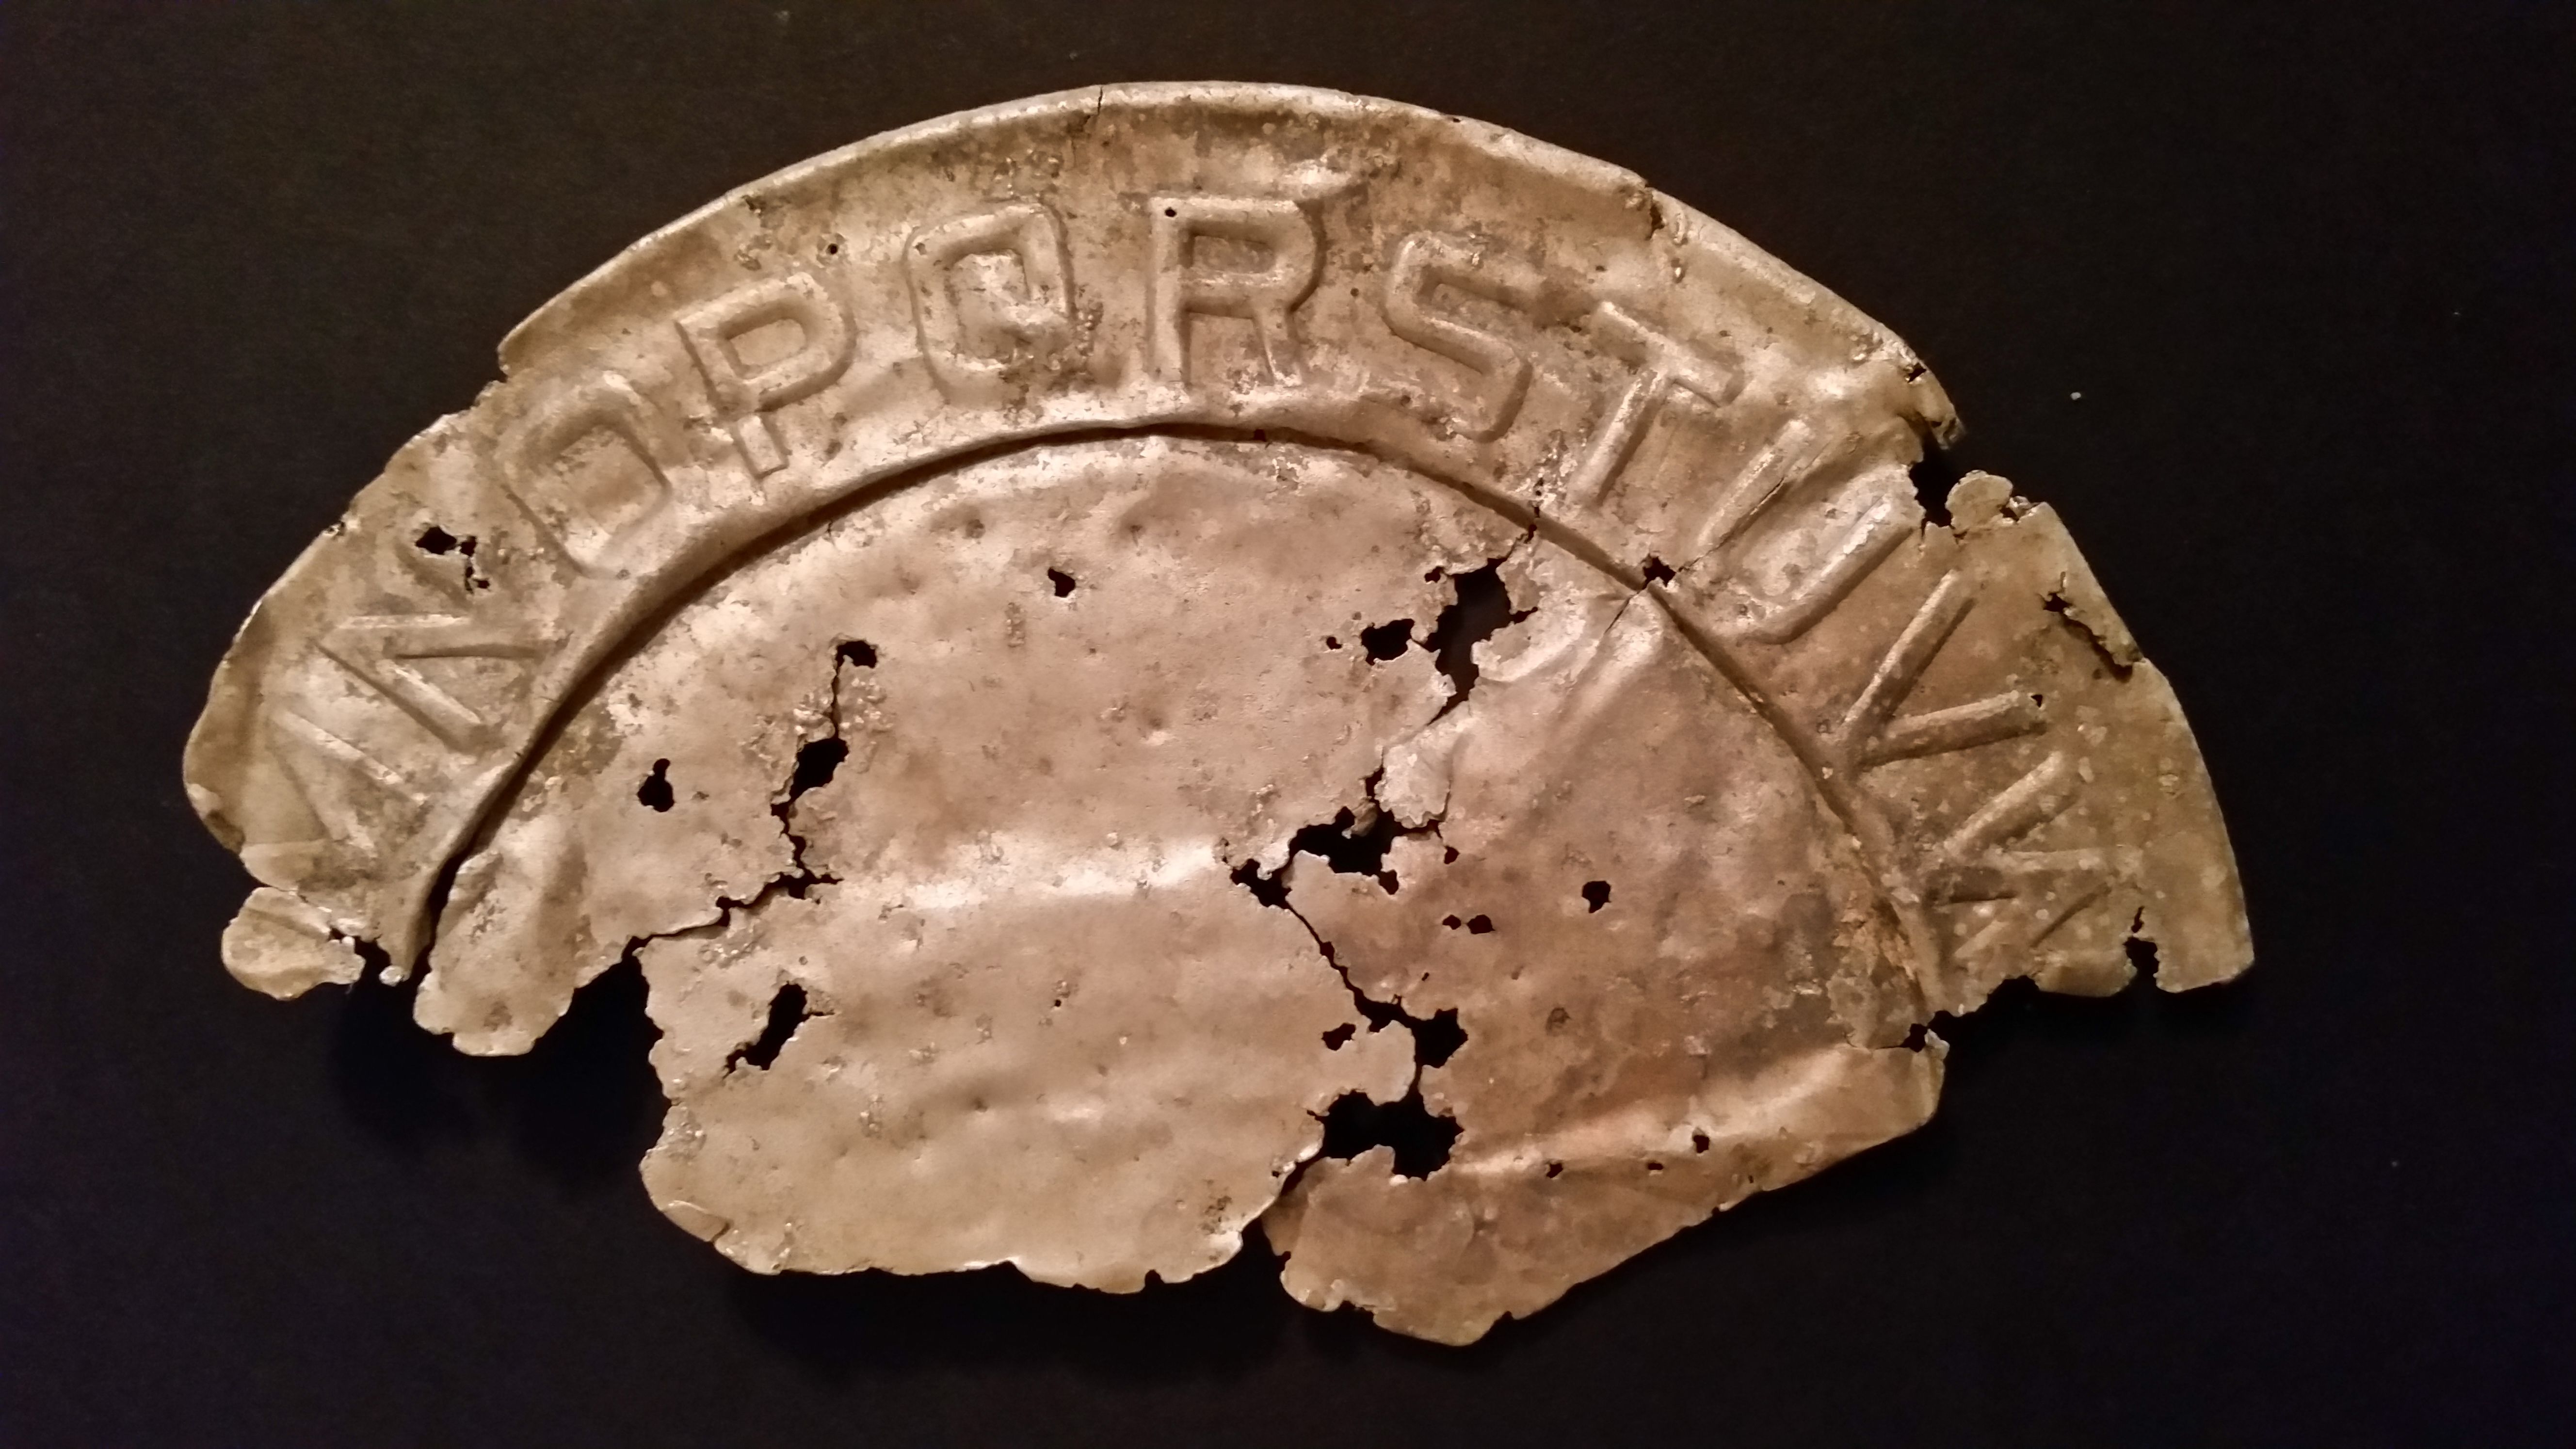 Creek find. I'm guessing it is a child's plate but not certain. Estimate about 7" diameter, very thin, no clue of age.